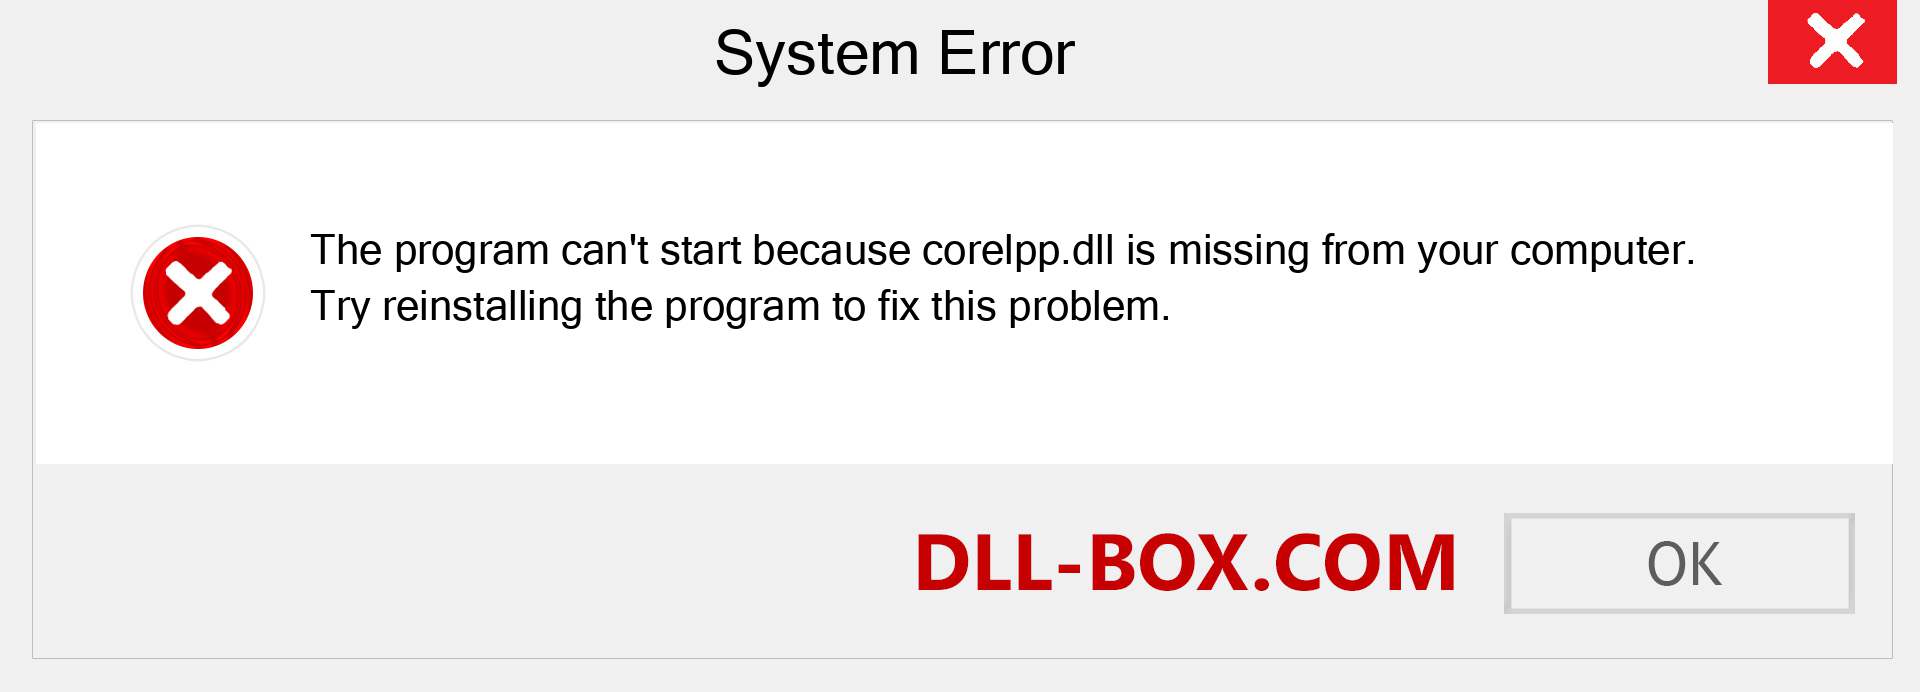  corelpp.dll file is missing?. Download for Windows 7, 8, 10 - Fix  corelpp dll Missing Error on Windows, photos, images